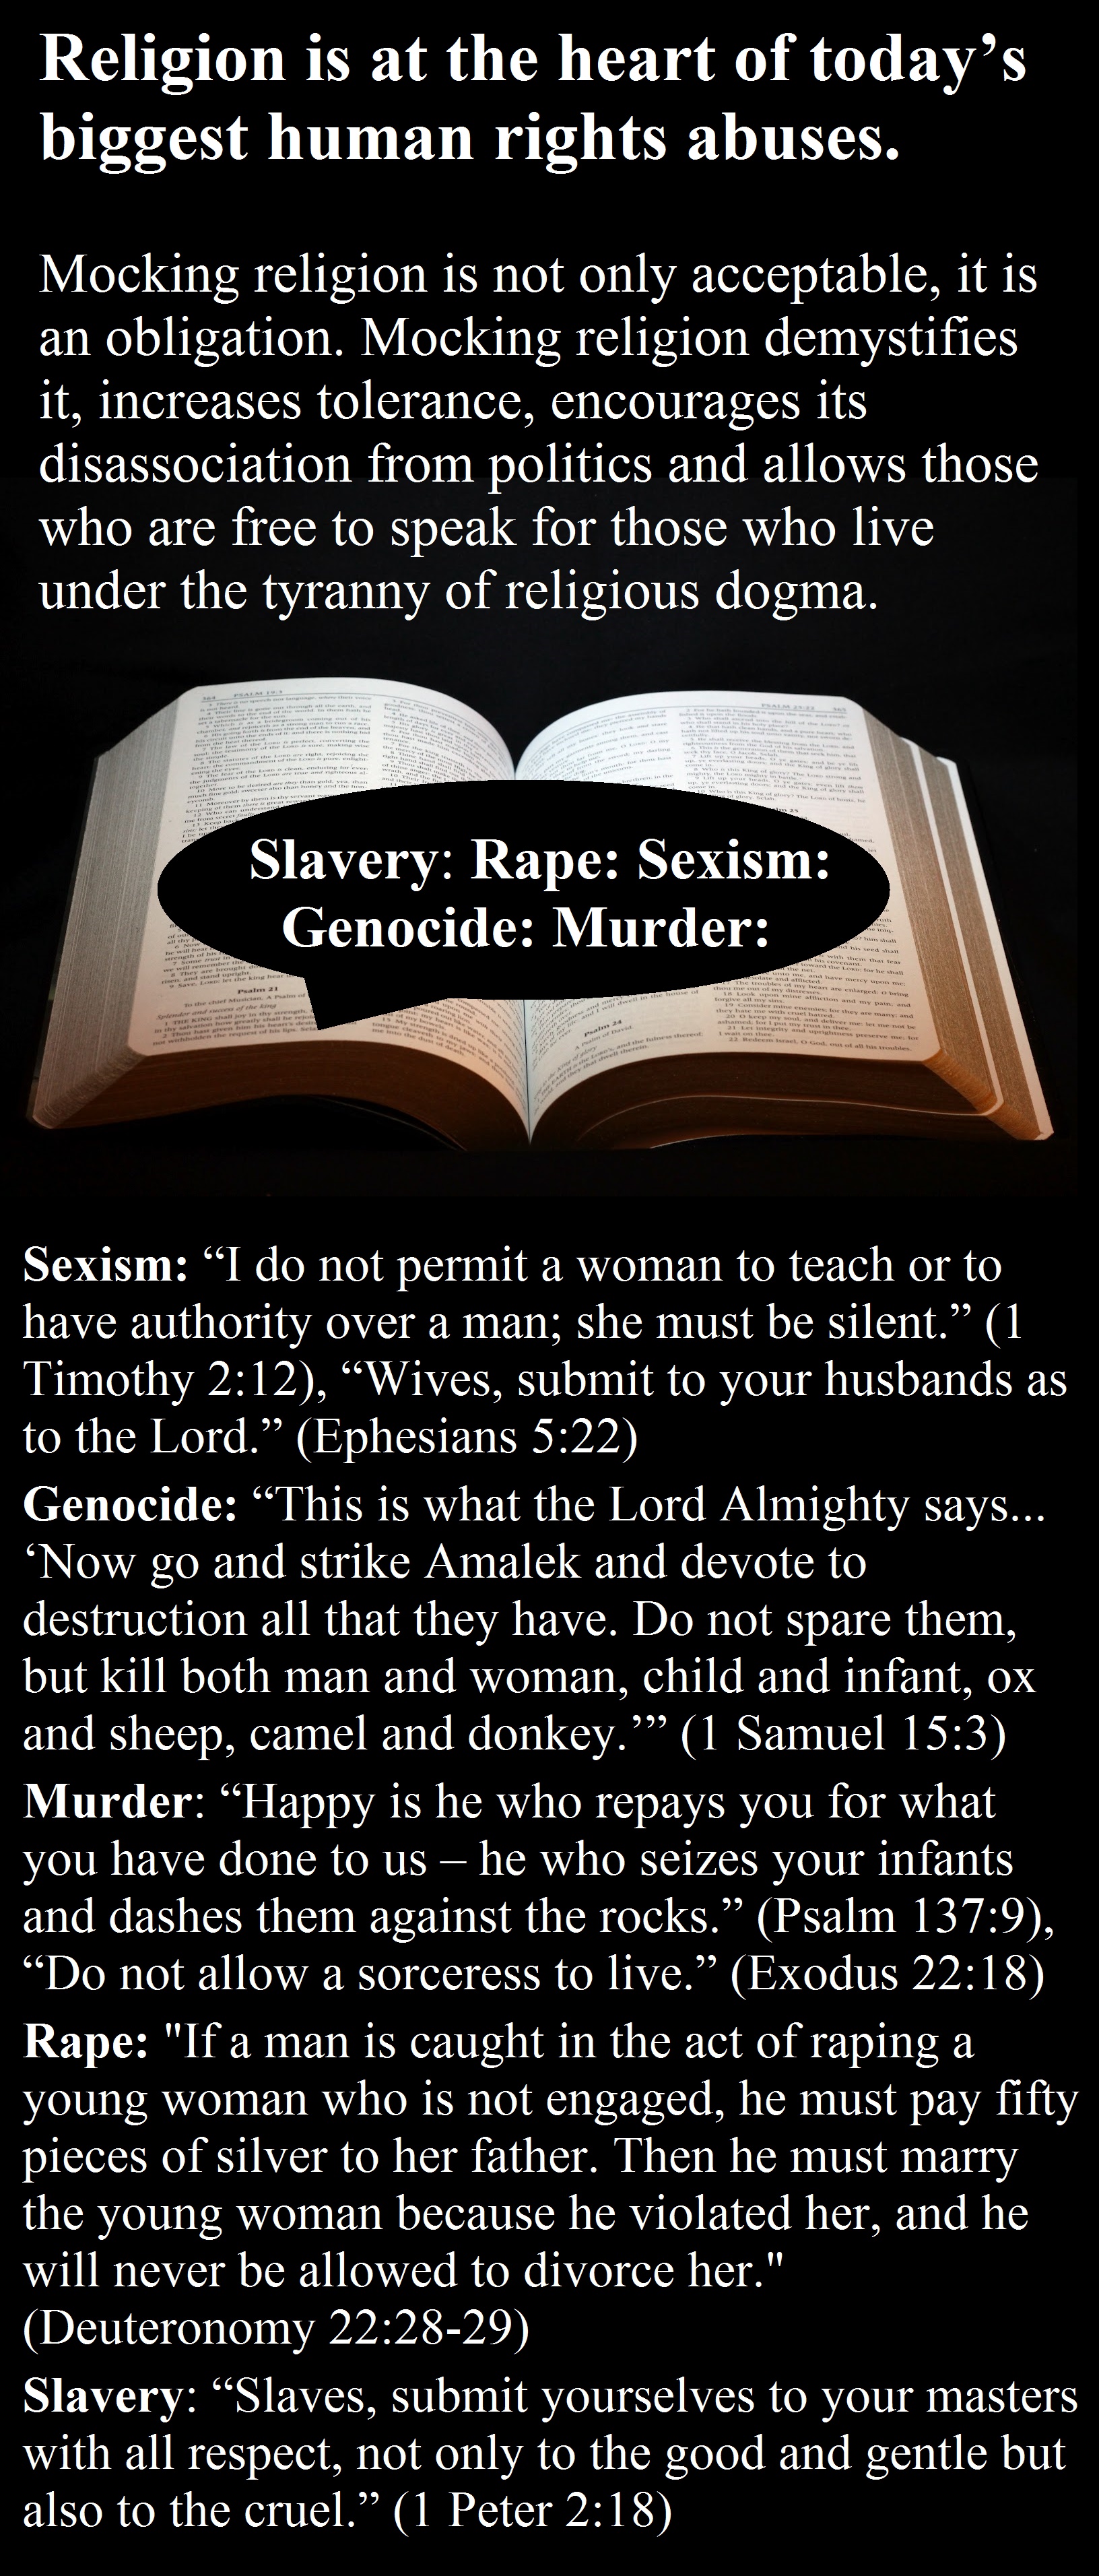 Sexism: “I do not permit a woman to teach or to have authority over a man; she must be silent.” (1 Timothy 2:12), “Wives, submit to your husbands as to the Lord.” (Ephesians 5:22) Genocide: “This is what the Lord Almighty says... ‘Now go and strike Amalek and devote to destruction all that they have. Do not spare them, but kill both man and woman, child and infant, ox and sheep, camel and donkey.’” (1 Samuel 15:3) Murder: “Happy is he who repays you for what you have done to us – he who seizes your infants and dashes them against the rocks.” (Psalm 137:9), “Do not allow a sorceress to live.” (Exodus 22:18) Rape: "If a man is caught in the act of raping a young woman who is not engaged, he must pay fifty pieces of silver to her father. Then he must marry the young woman because he violated her, and he will never be allowed to divorce her." (Deuteronomy 22:28-29) Slavery: “Slaves, submit yourselves to your masters with all respect, not only to the good and gentle but also to the cruel.” (1 Peter 2:18)